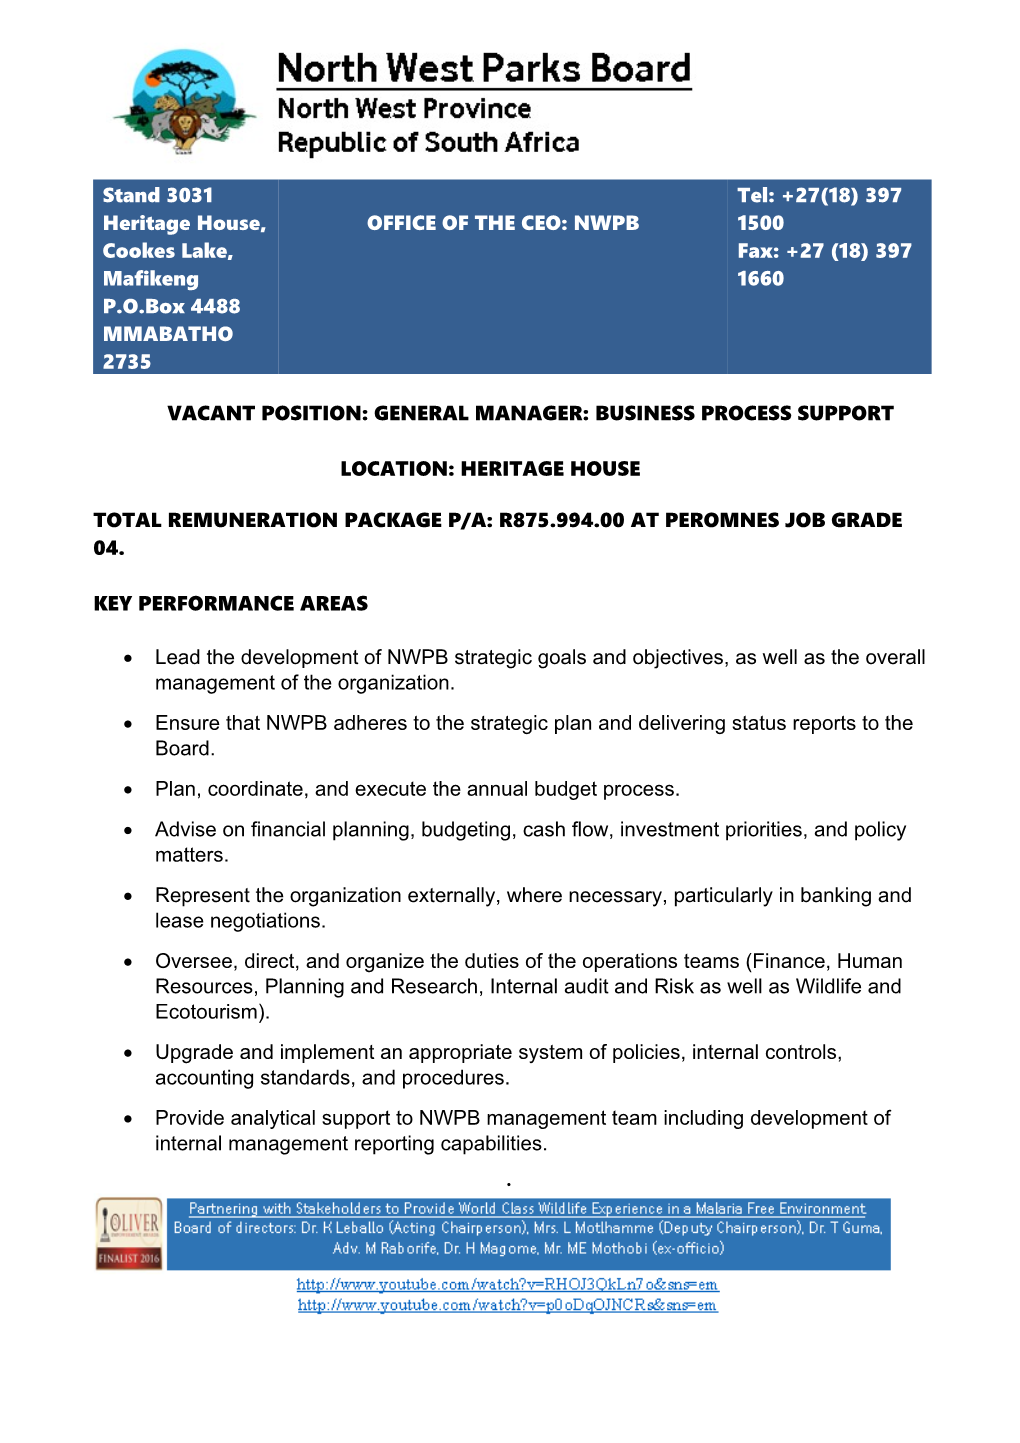 Vacant Position: General Manager: Business Process Support